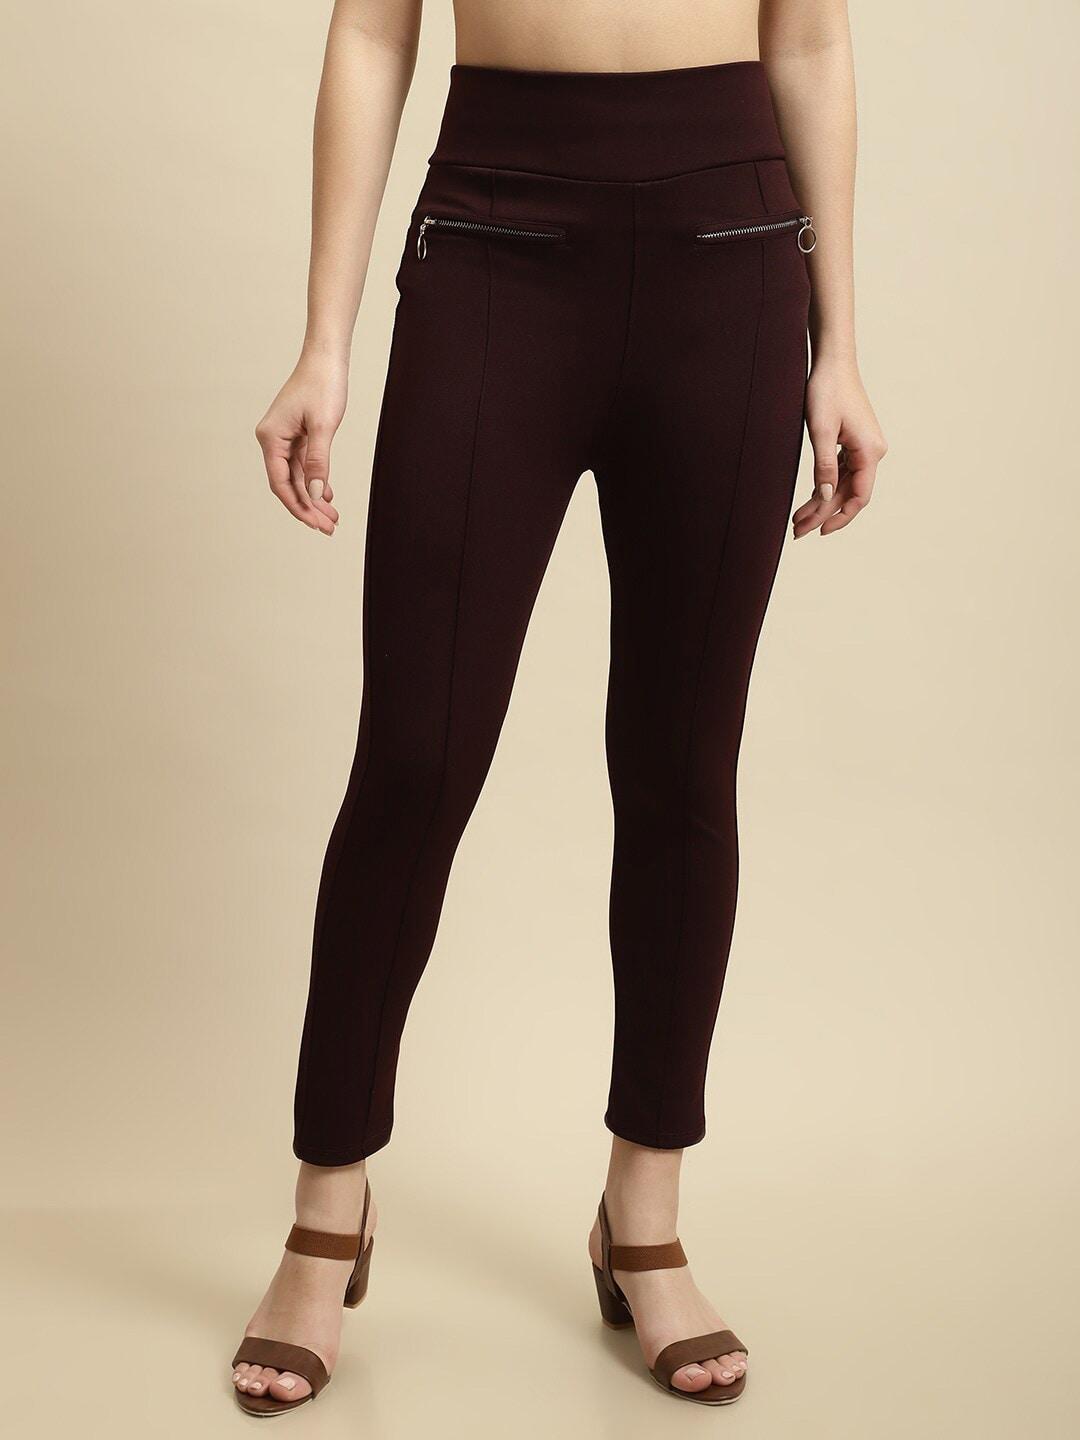 tag-7-women-skinny-fit-ankle-length-treggings